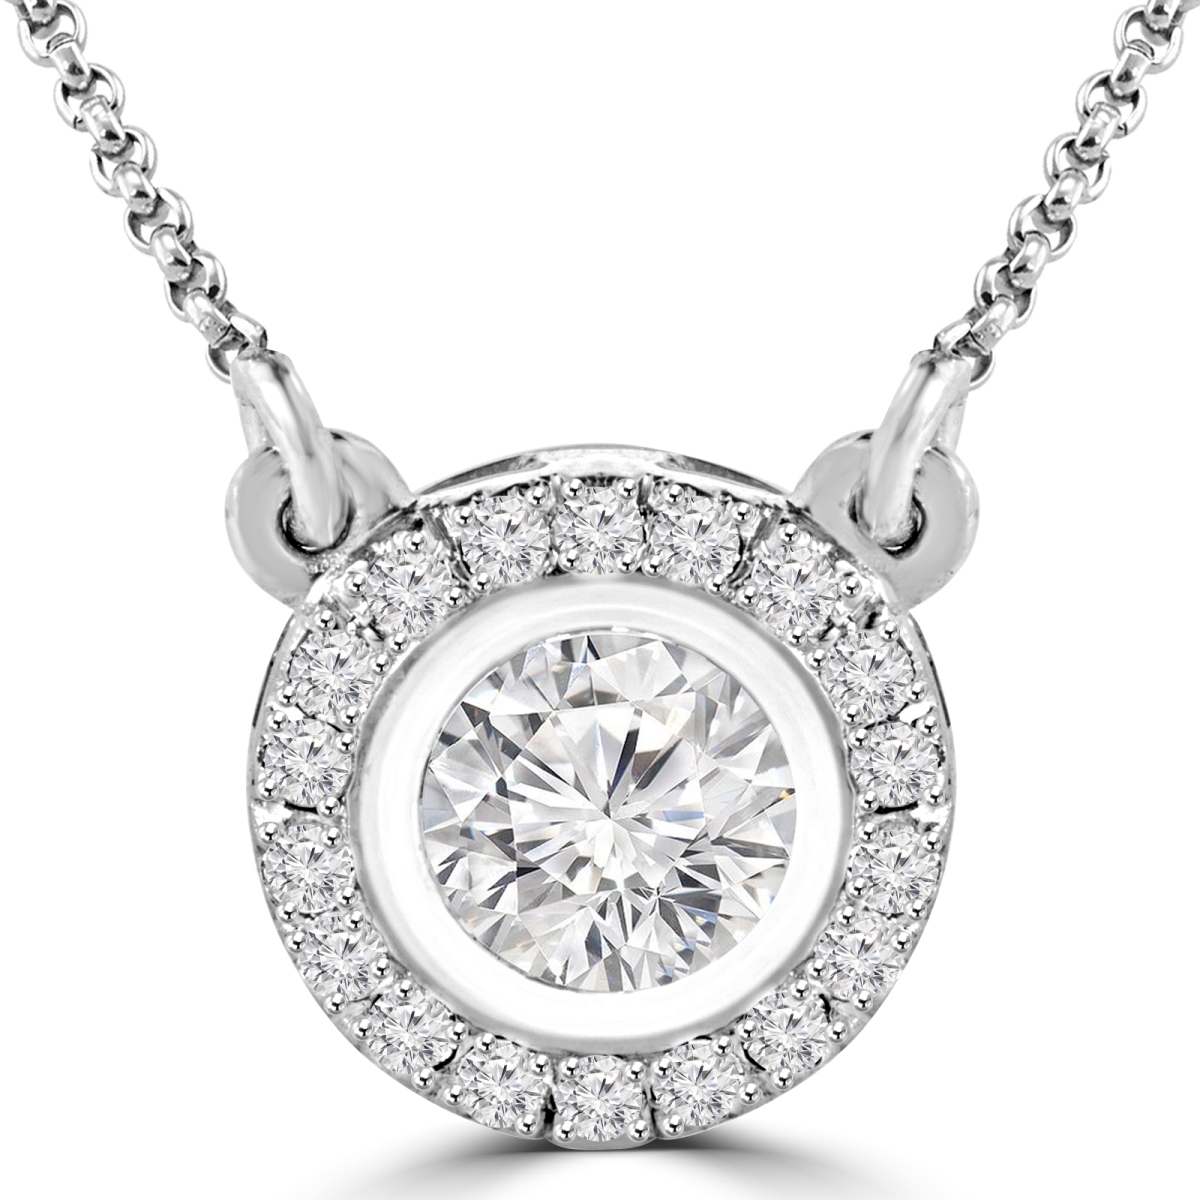 Md170148 0.5 Ctw Round Diamond Halo Solitaire With Accents Pendant Necklace In 14k